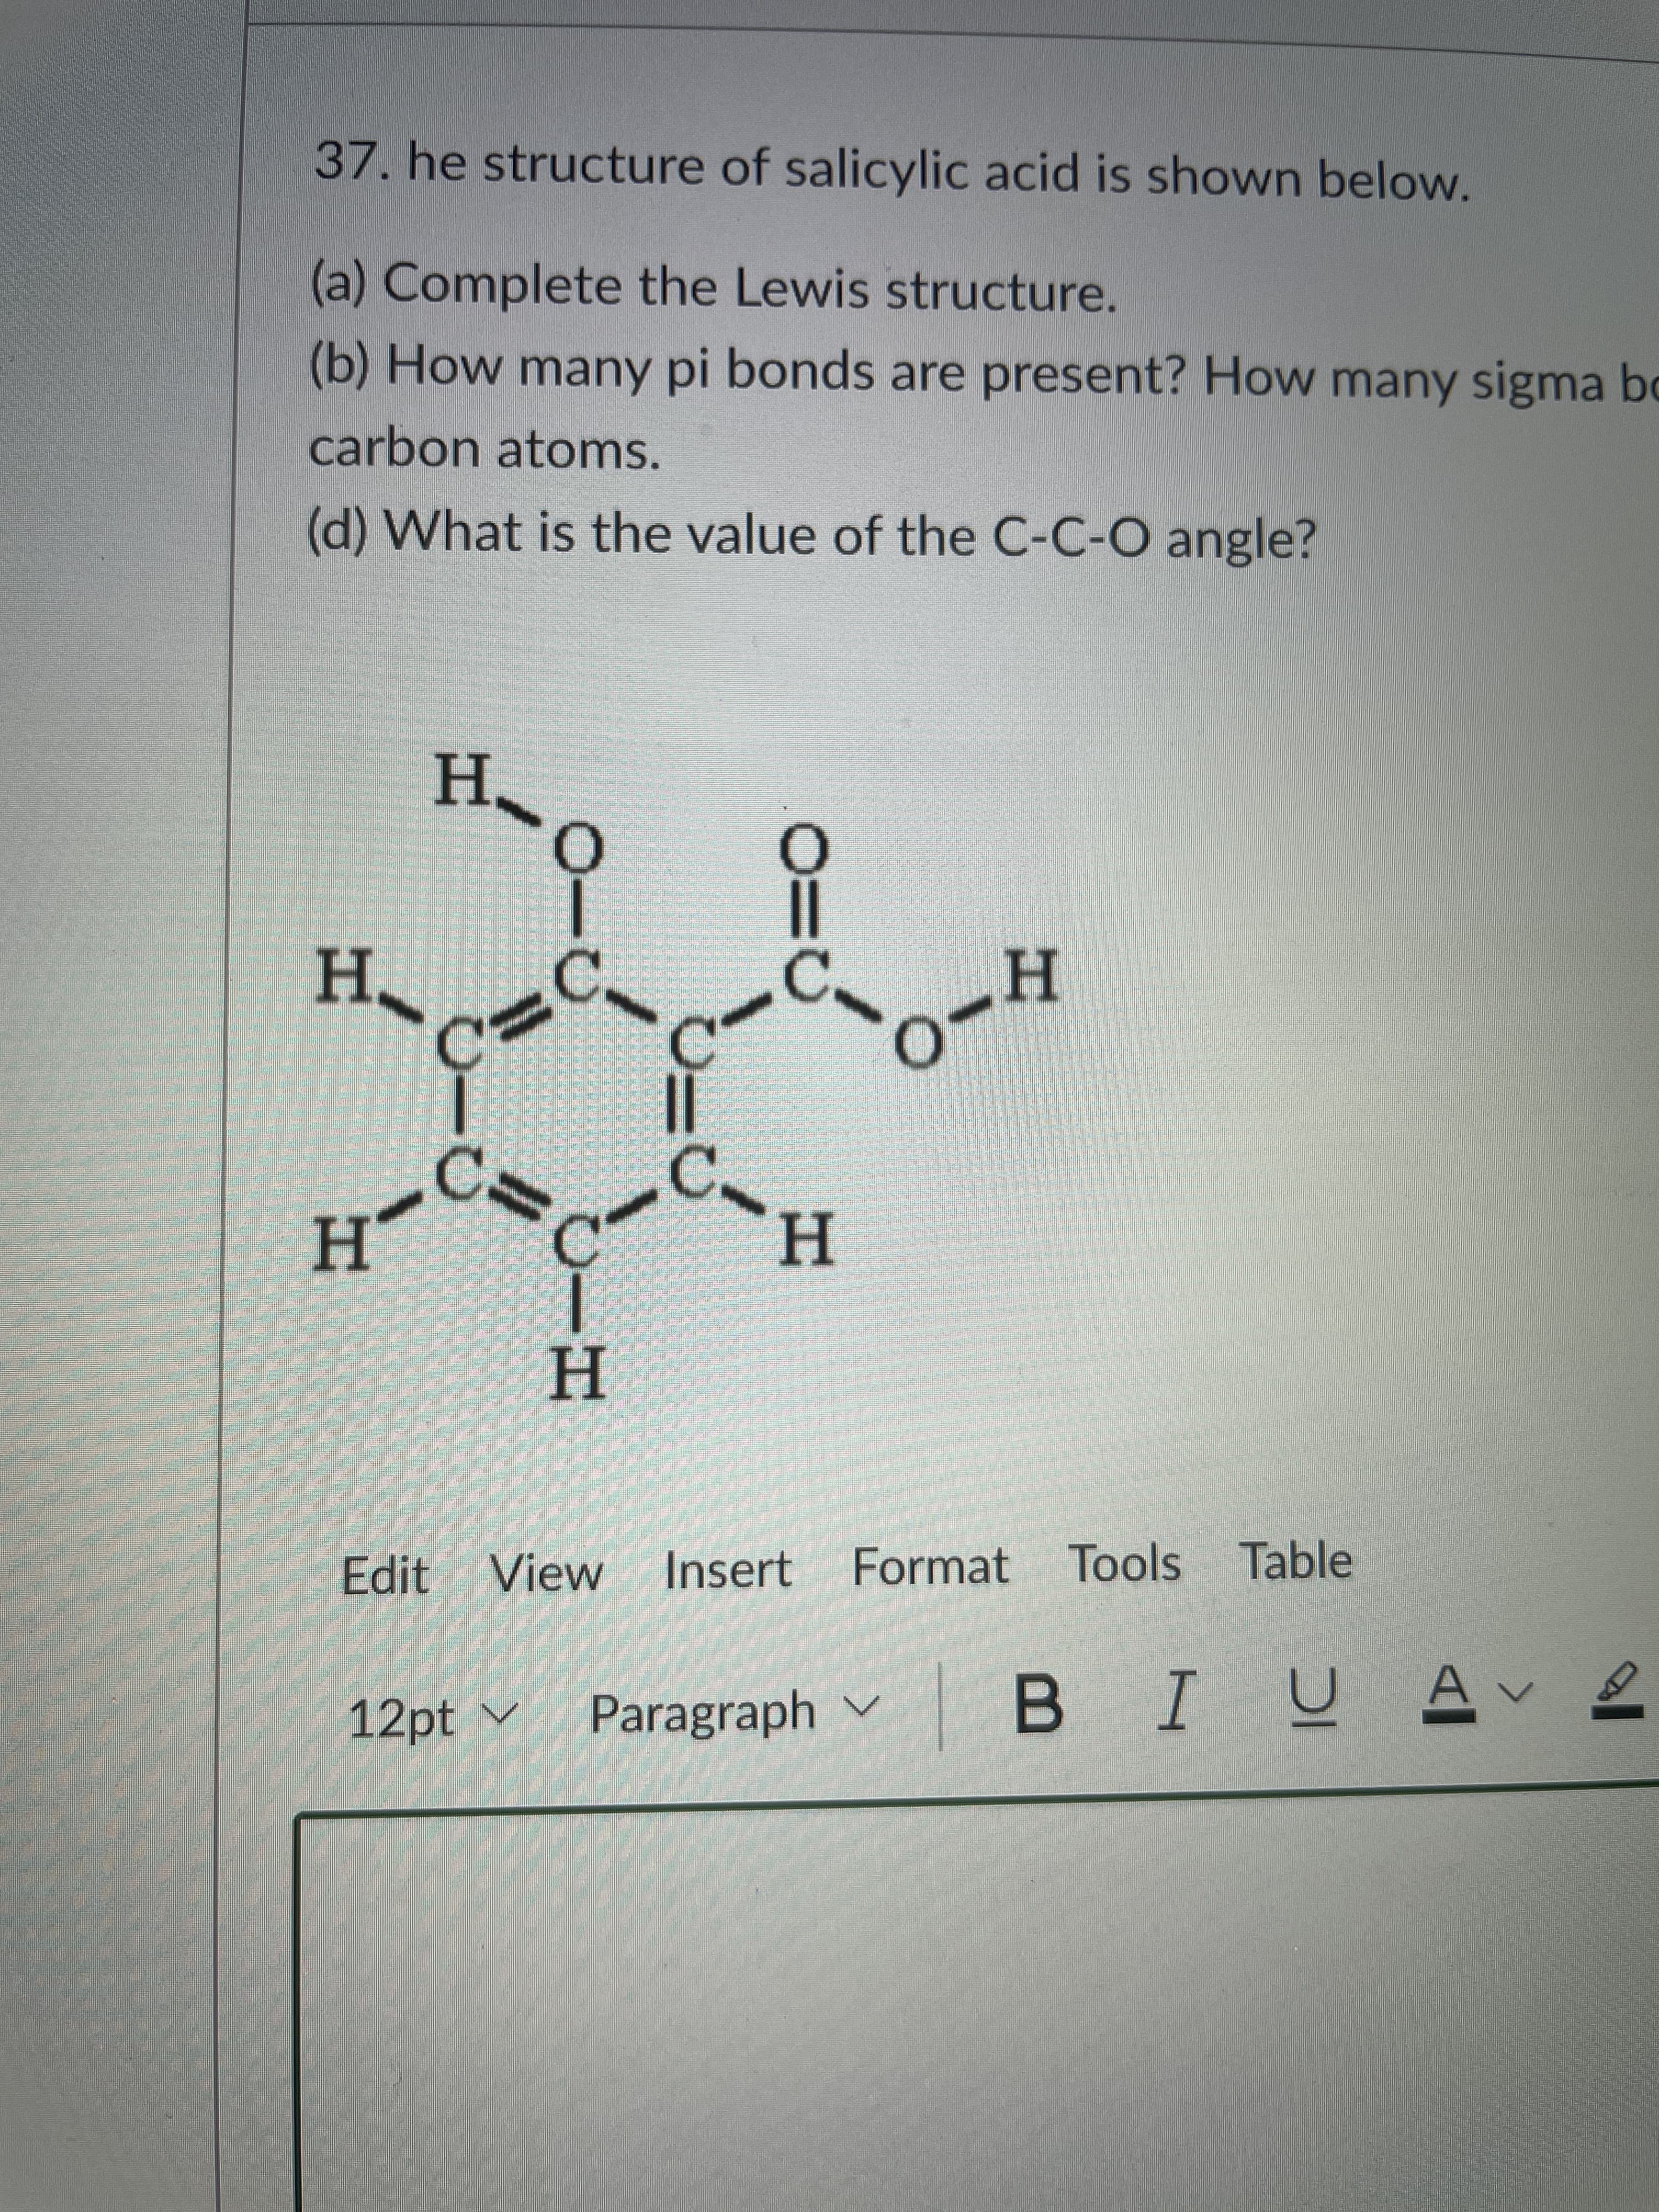 37. he structure of salicylic acid is shown below.
(a) Complete the Lewis structure.
(b) How many pi bonds are present? How many sigma bo
carbon atoms.
(d) What is the value of the C-C-O angle?
H.
H.
H.
H.
H
Edit View
Insert Format Tools Table
12pt v
Paragraph v
BIUAve
